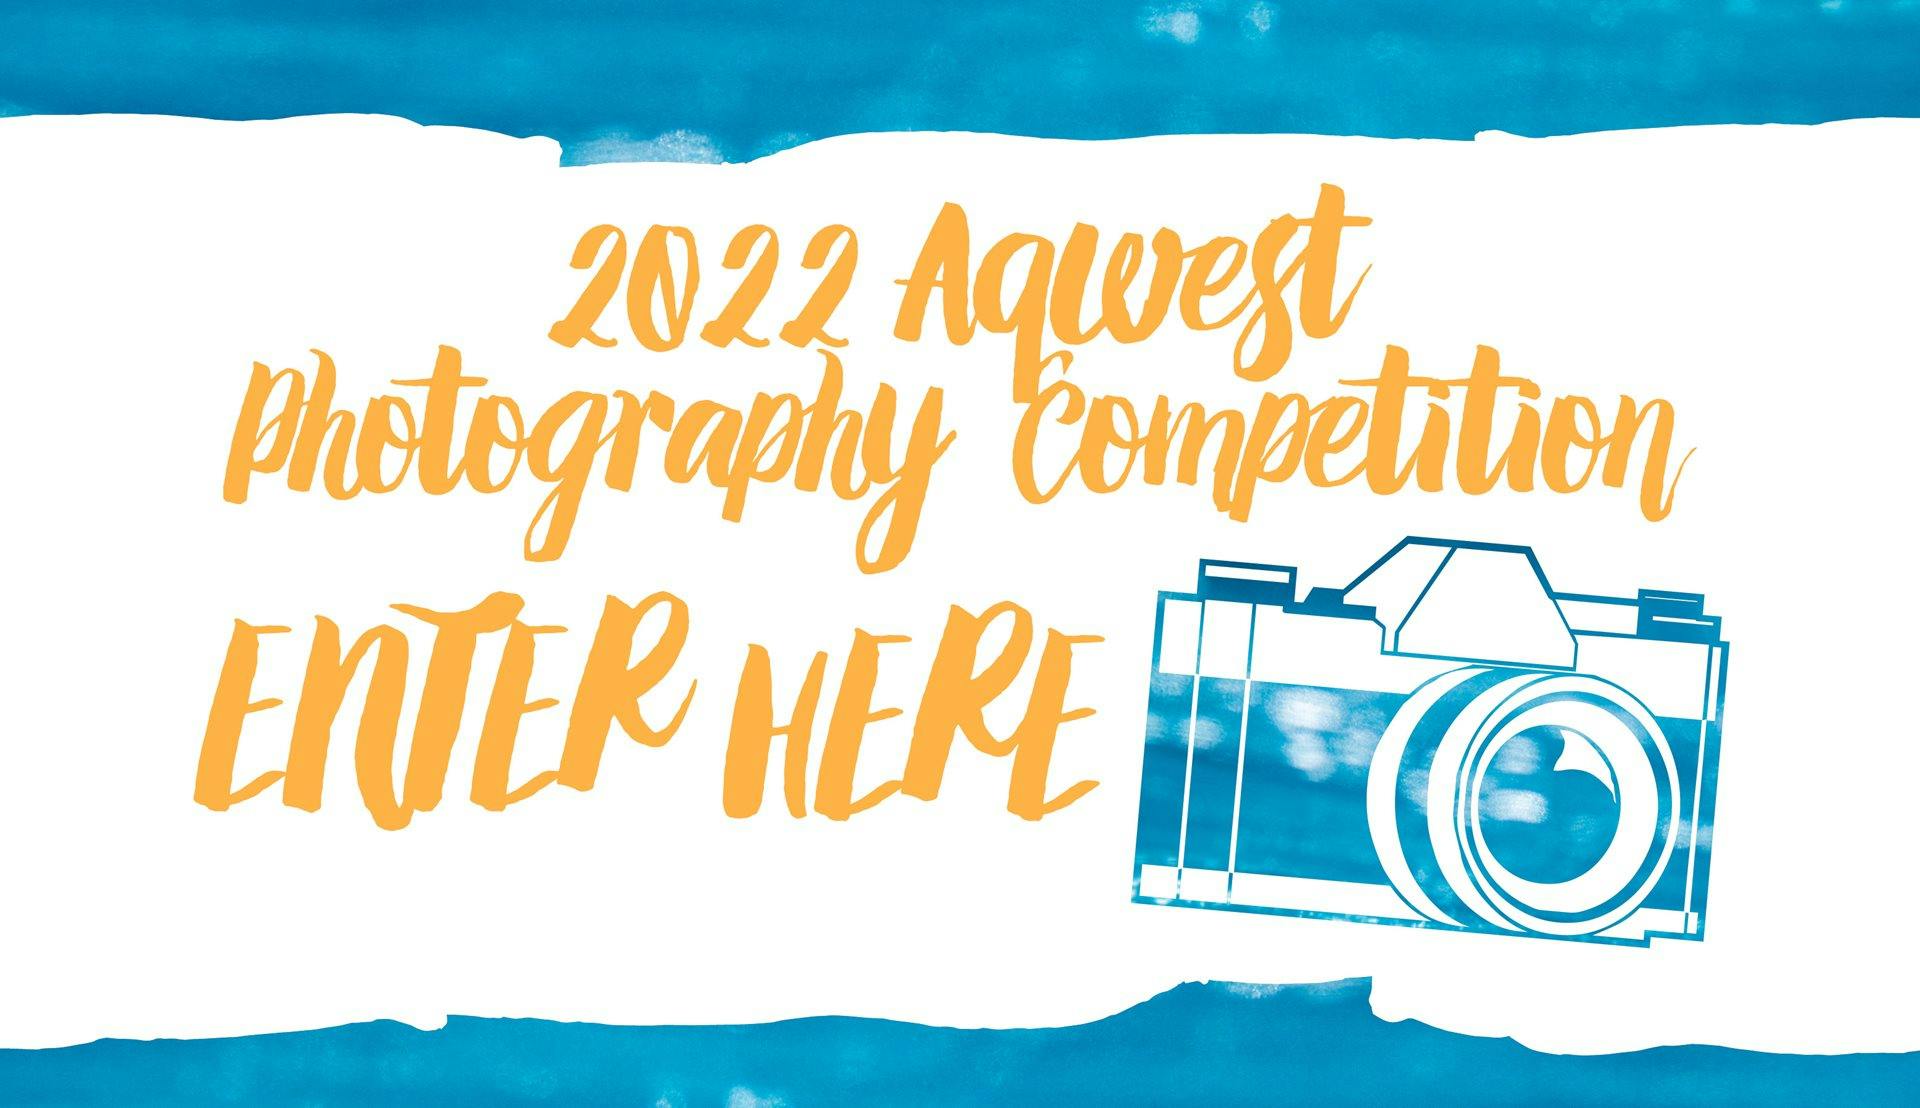 Banner with camera and text reading "2022 Aqwest Photography Competition, enter here".